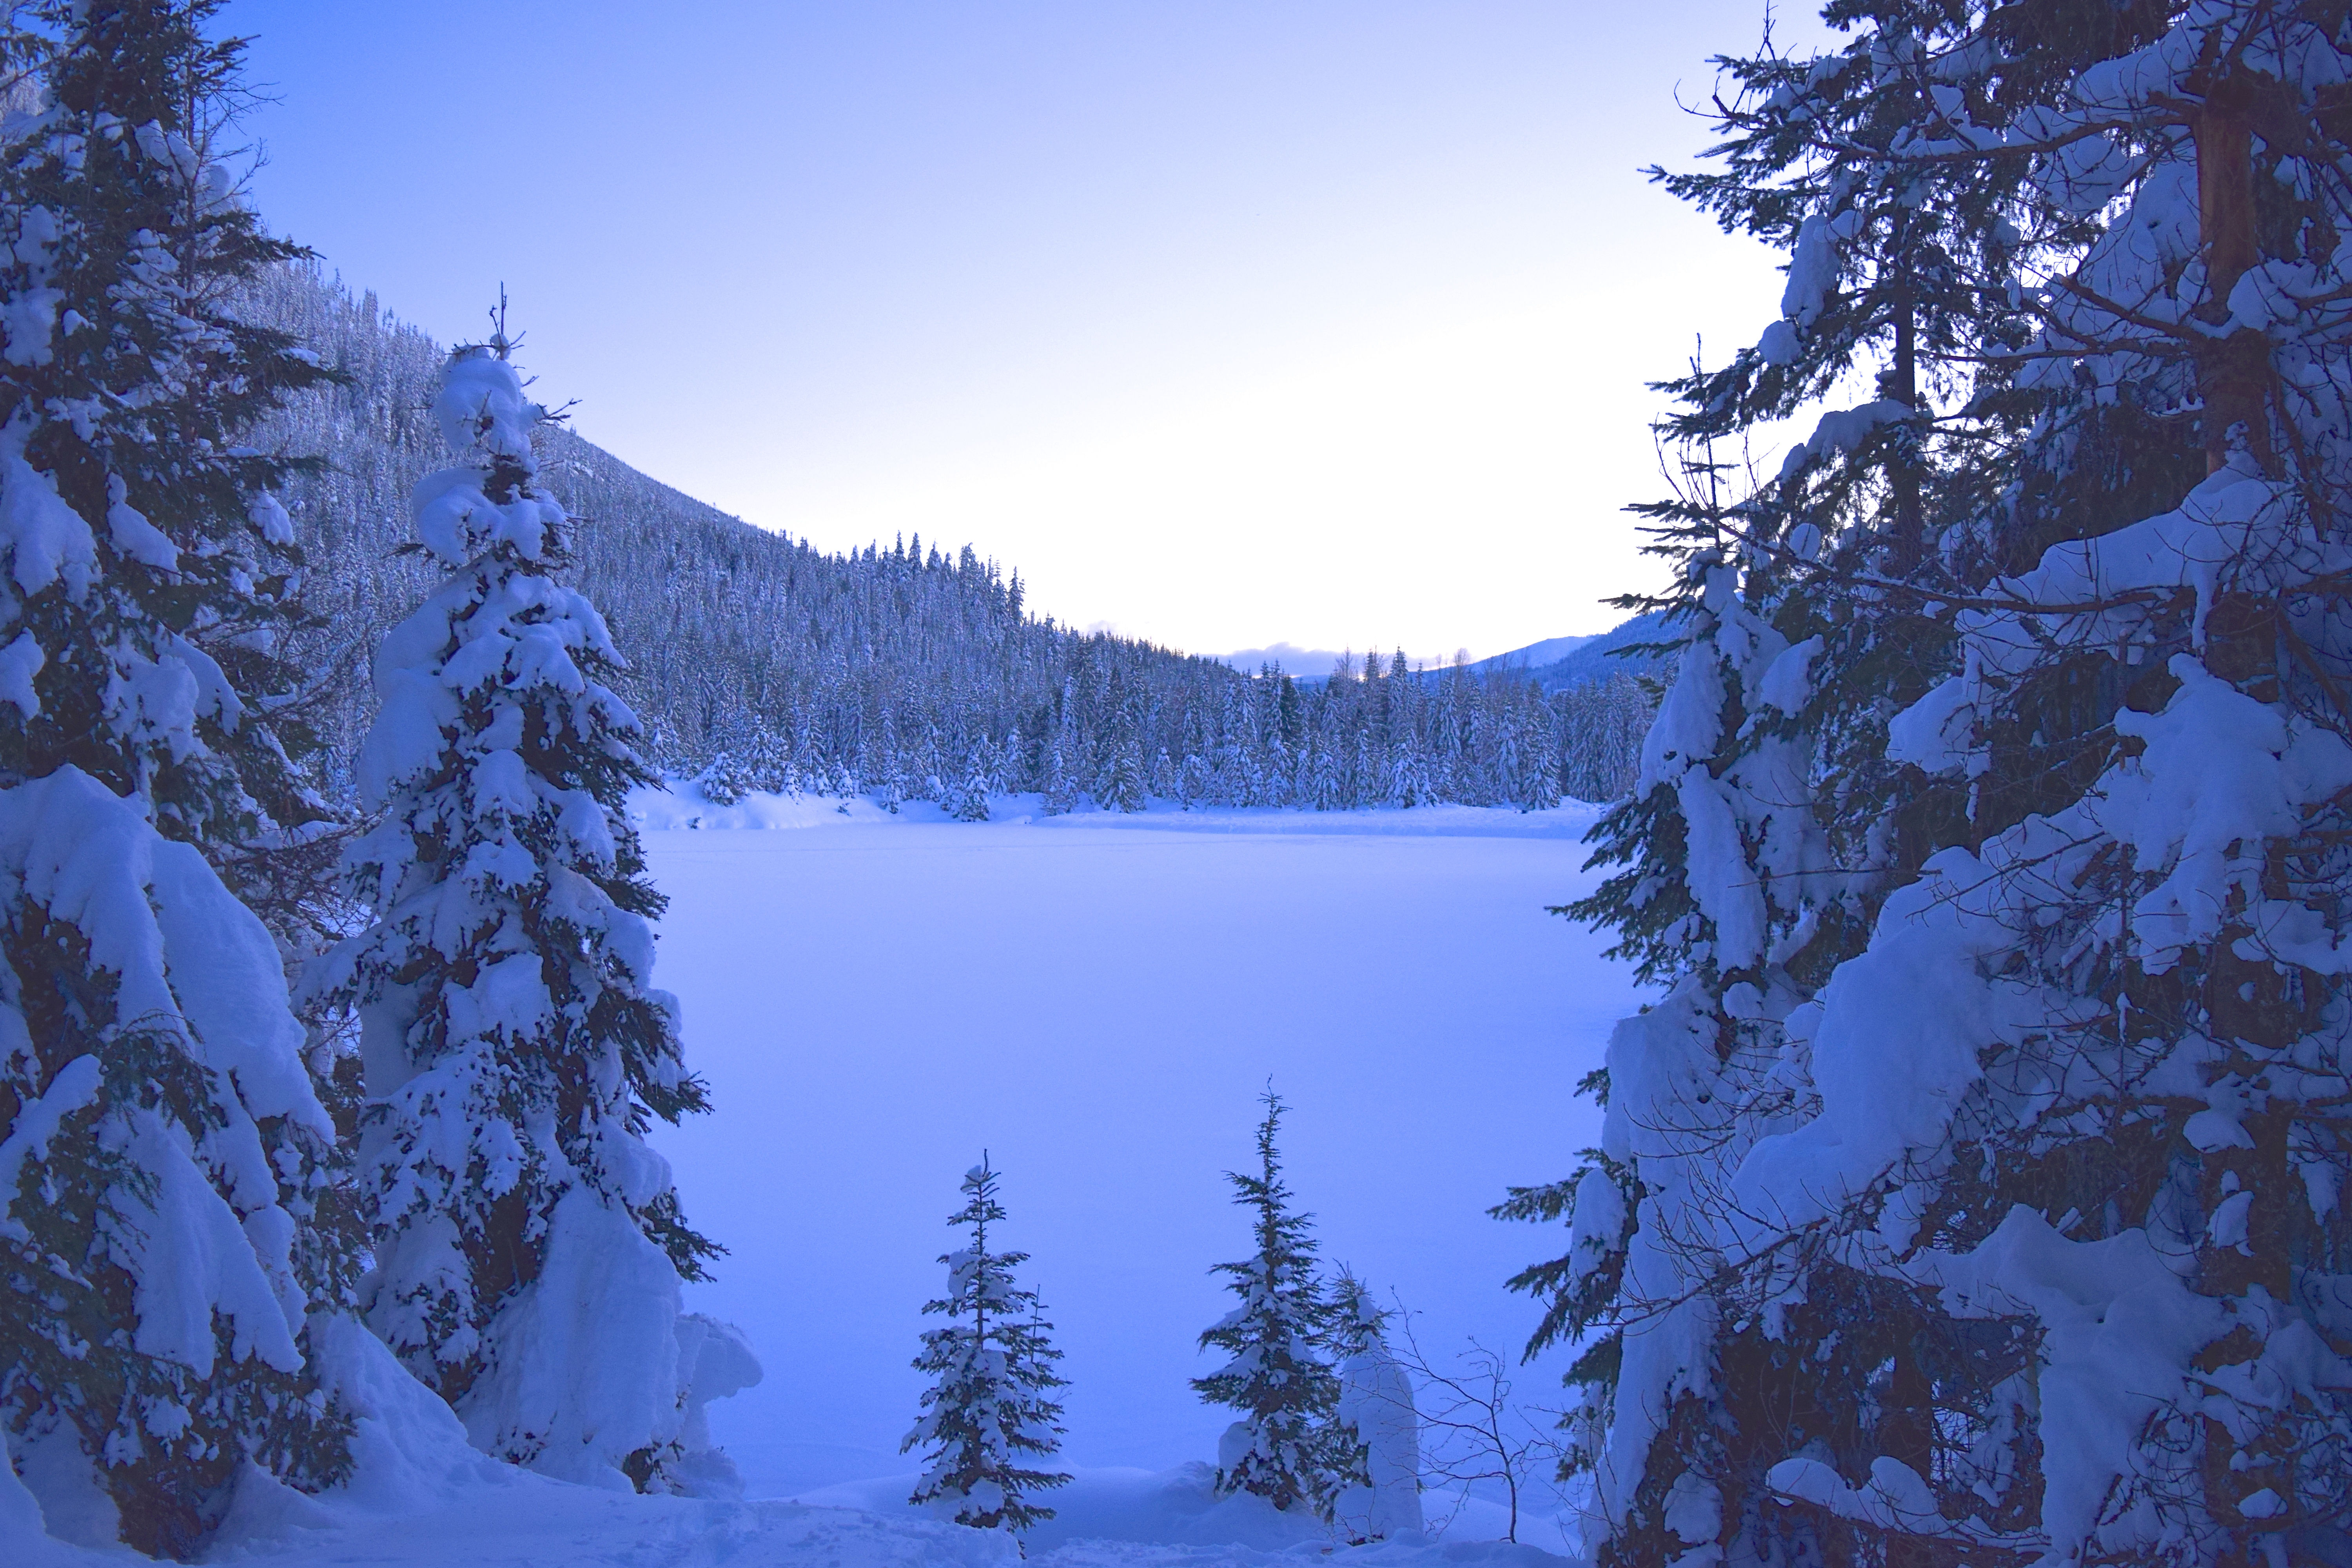 gold creek snowshoe, winter hikes, snowshoeing with children